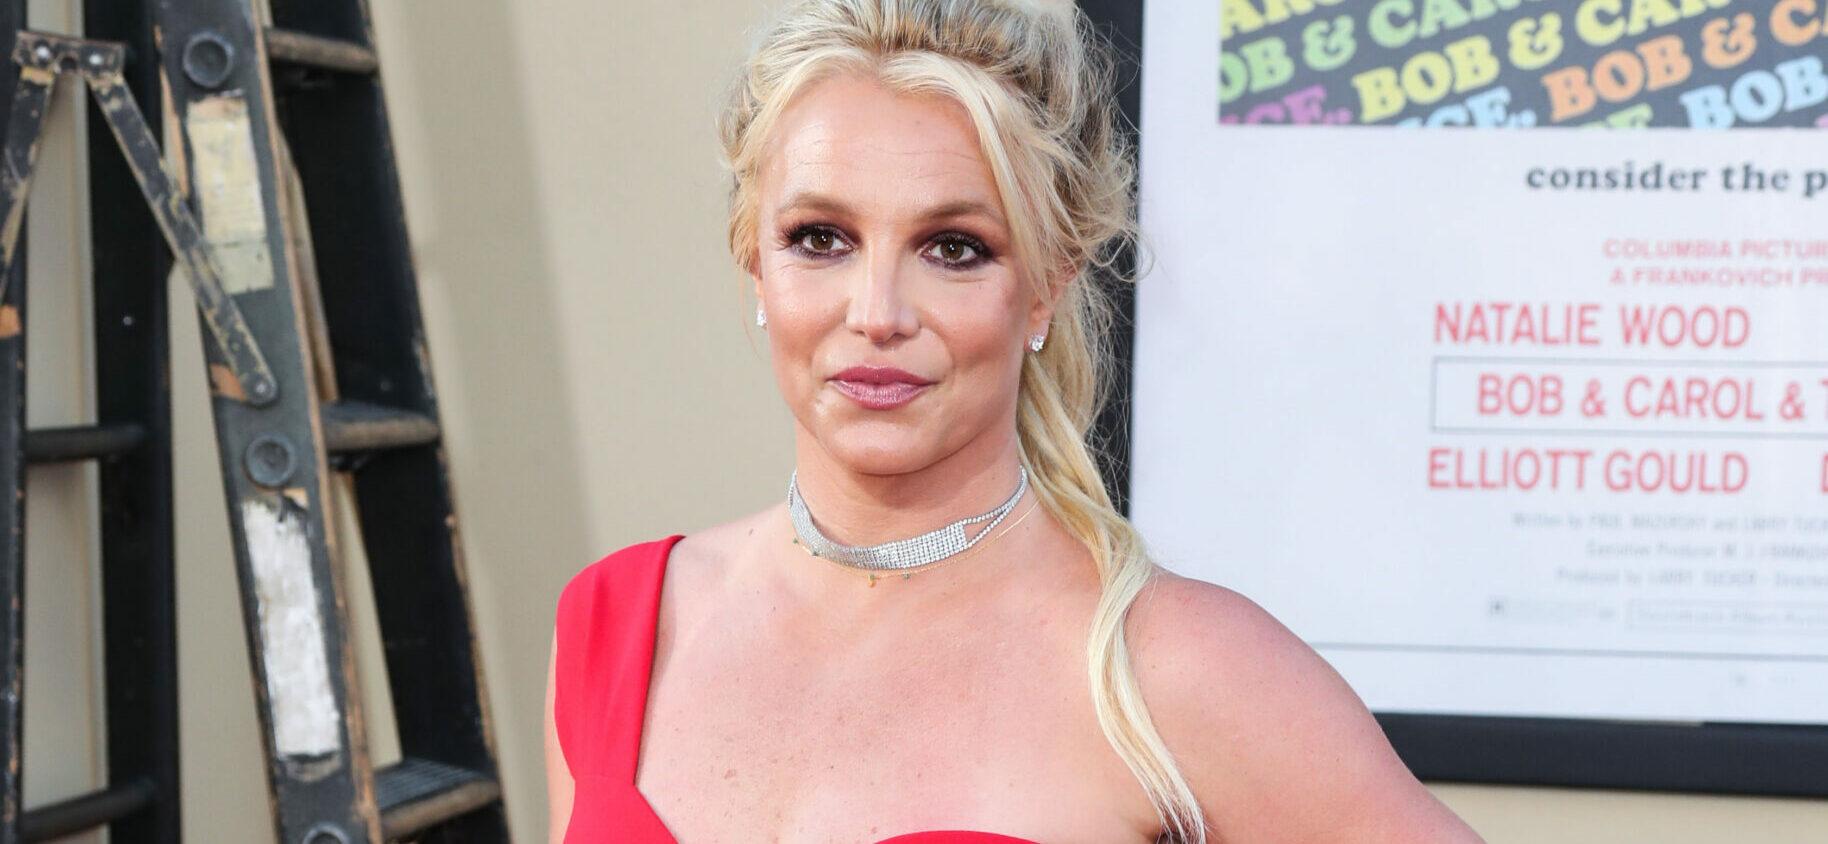 Britney Spears’ Health Issues Reportedly ‘More Severe Than People Realize’